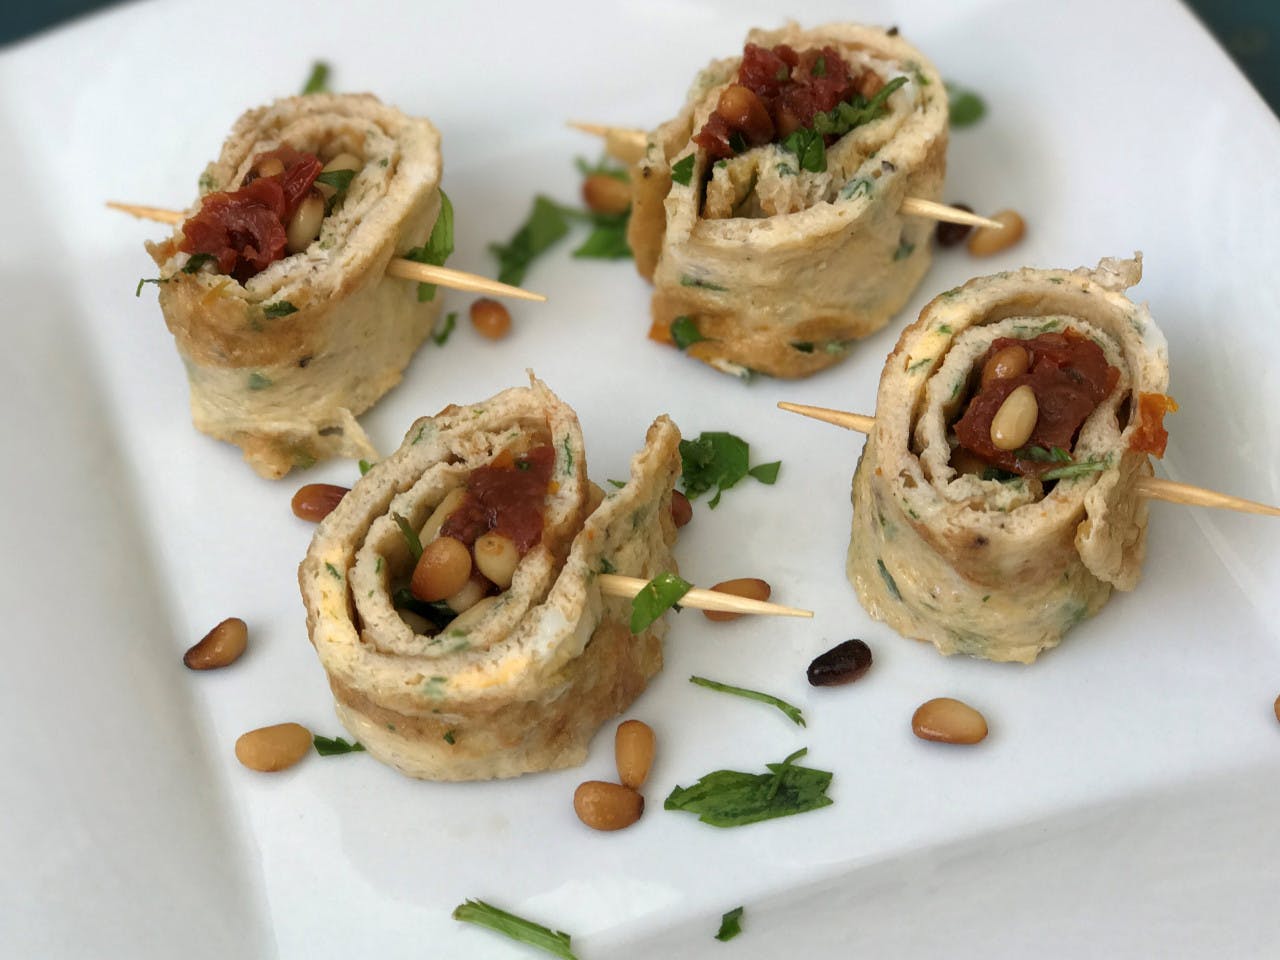 Omelet roll with sun-dried tomato and pine nuts